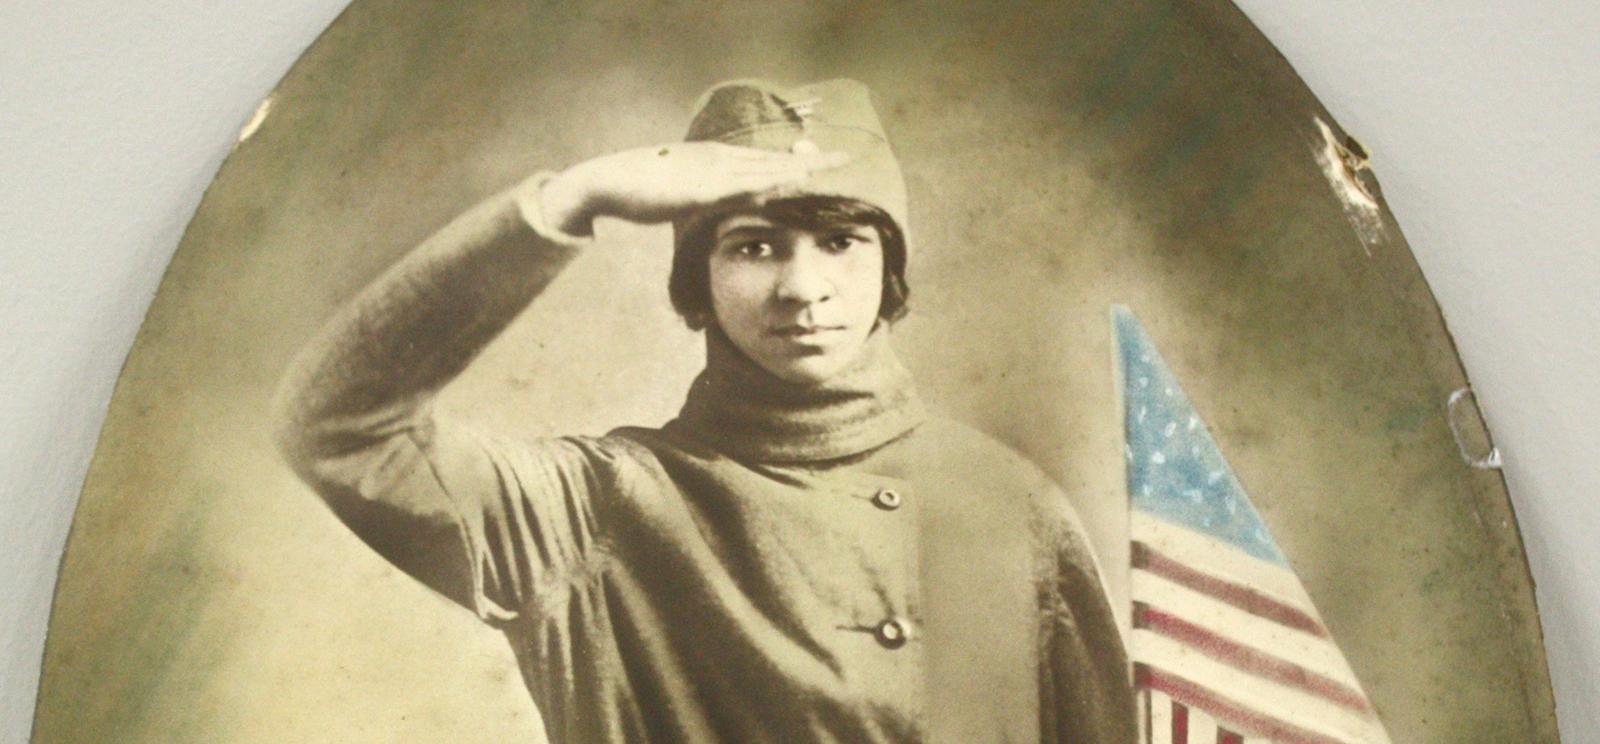 Sepia photograph of a Black woman in cap and uniform saluting while holding a U.S. flag.